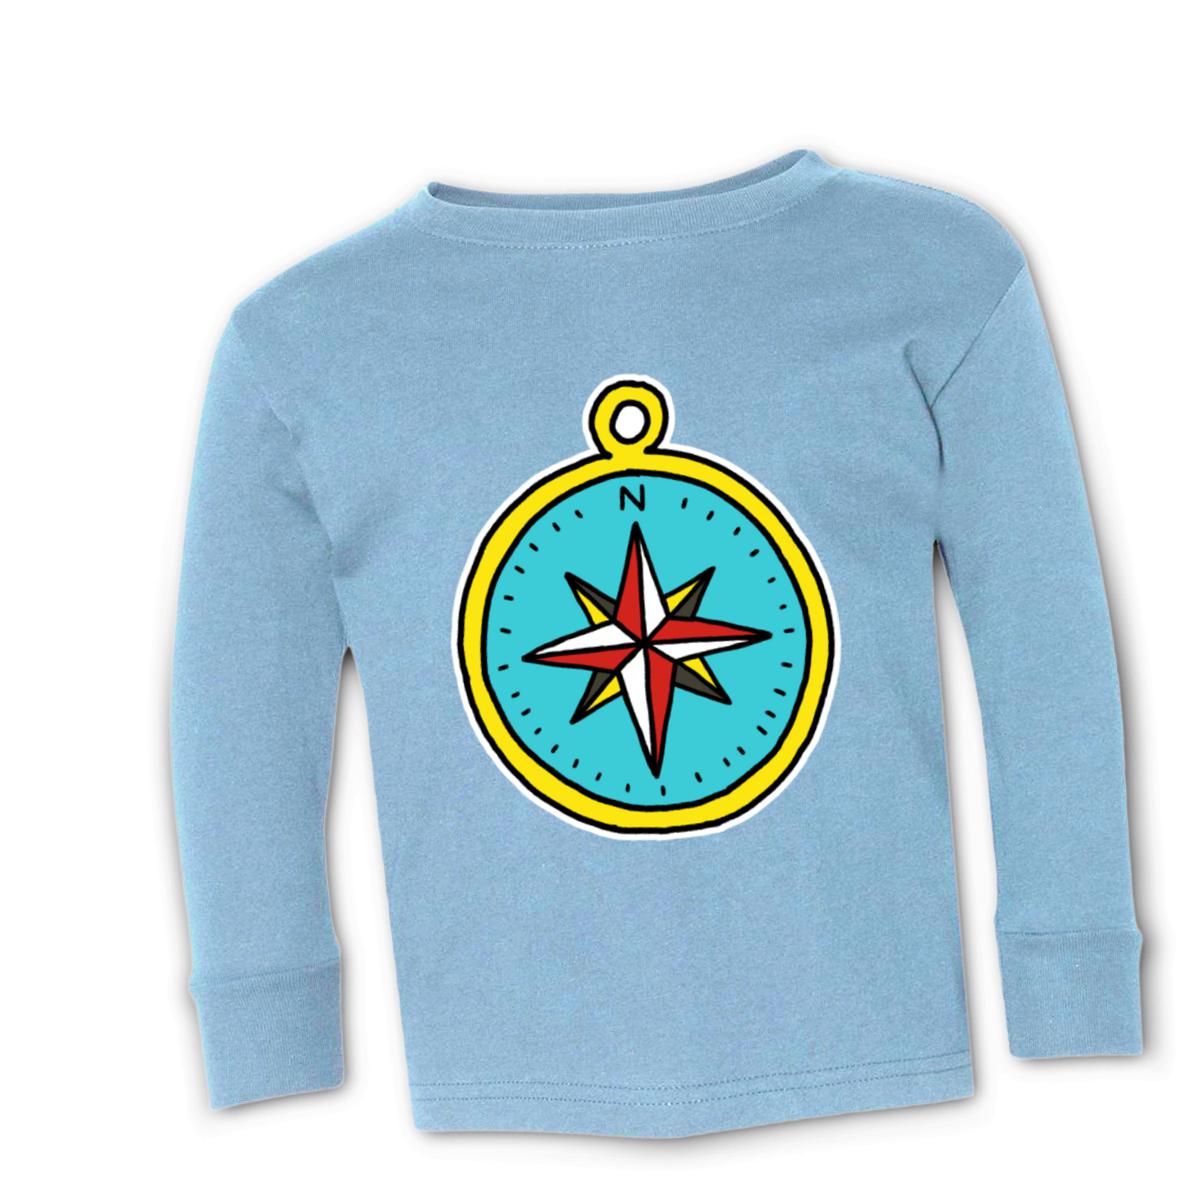 American Traditional Compass Kid's Long Sleeve Tee Large light-blue